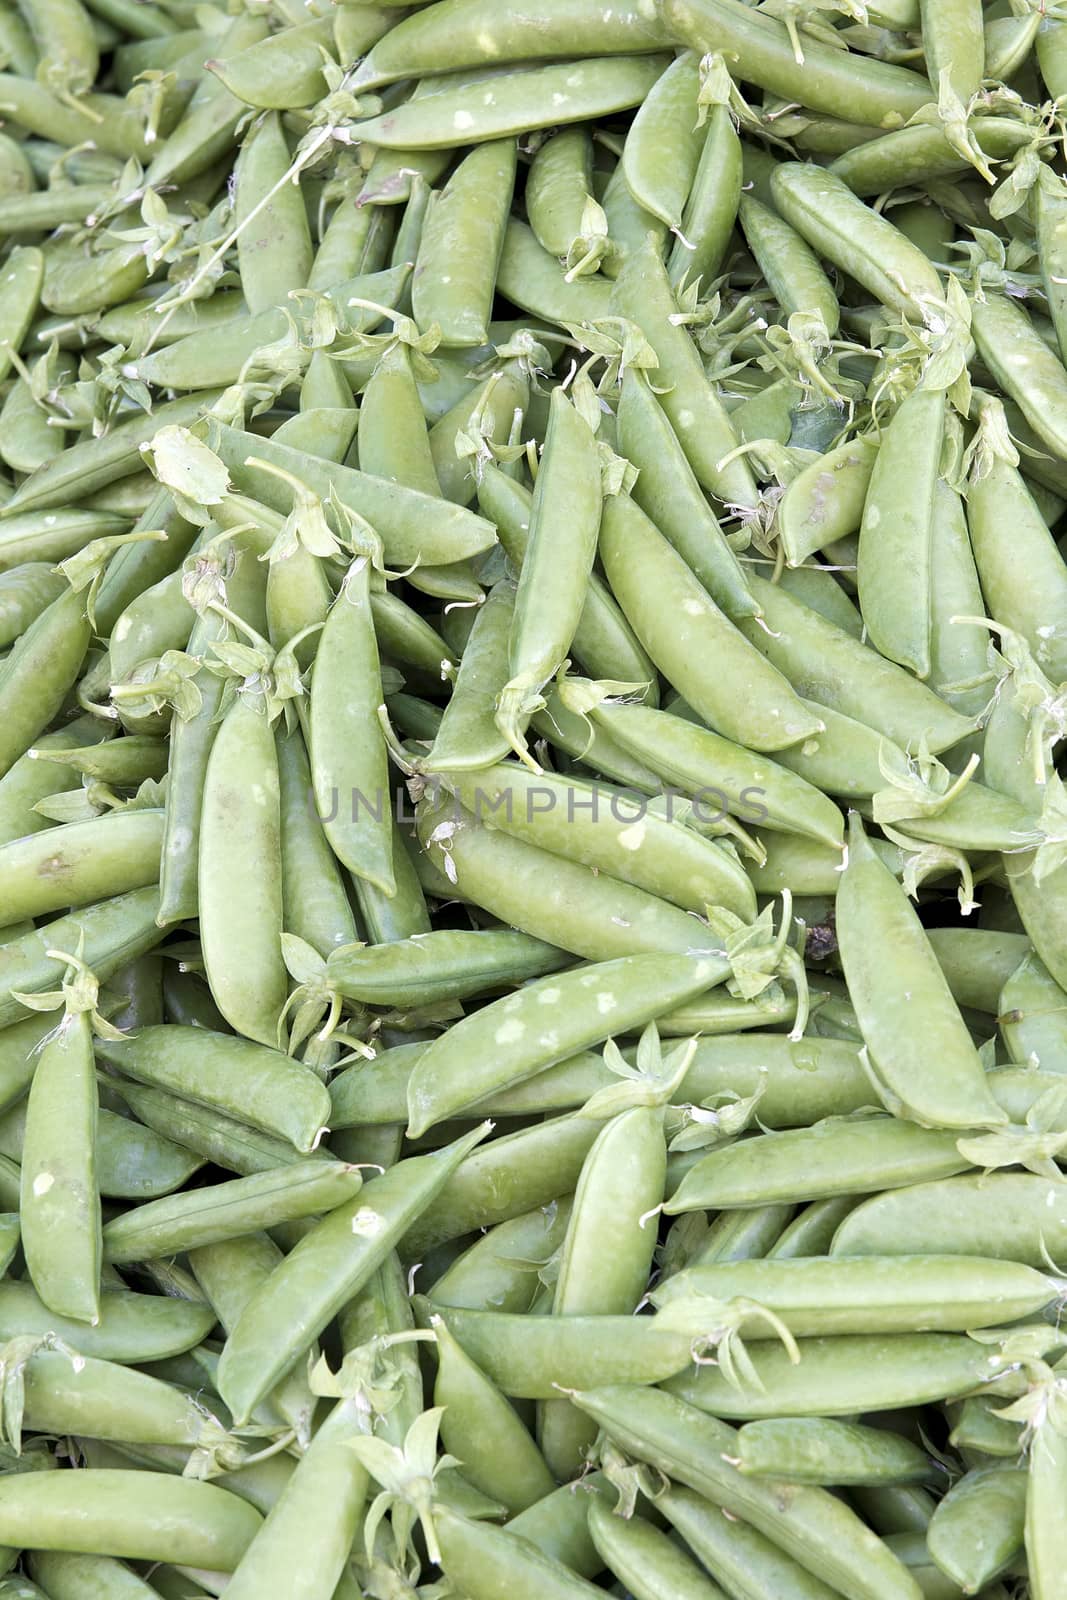 Pile of Sugar Snap Pea Pods at Fruits and Vegetables Stall in Farmers Market Background